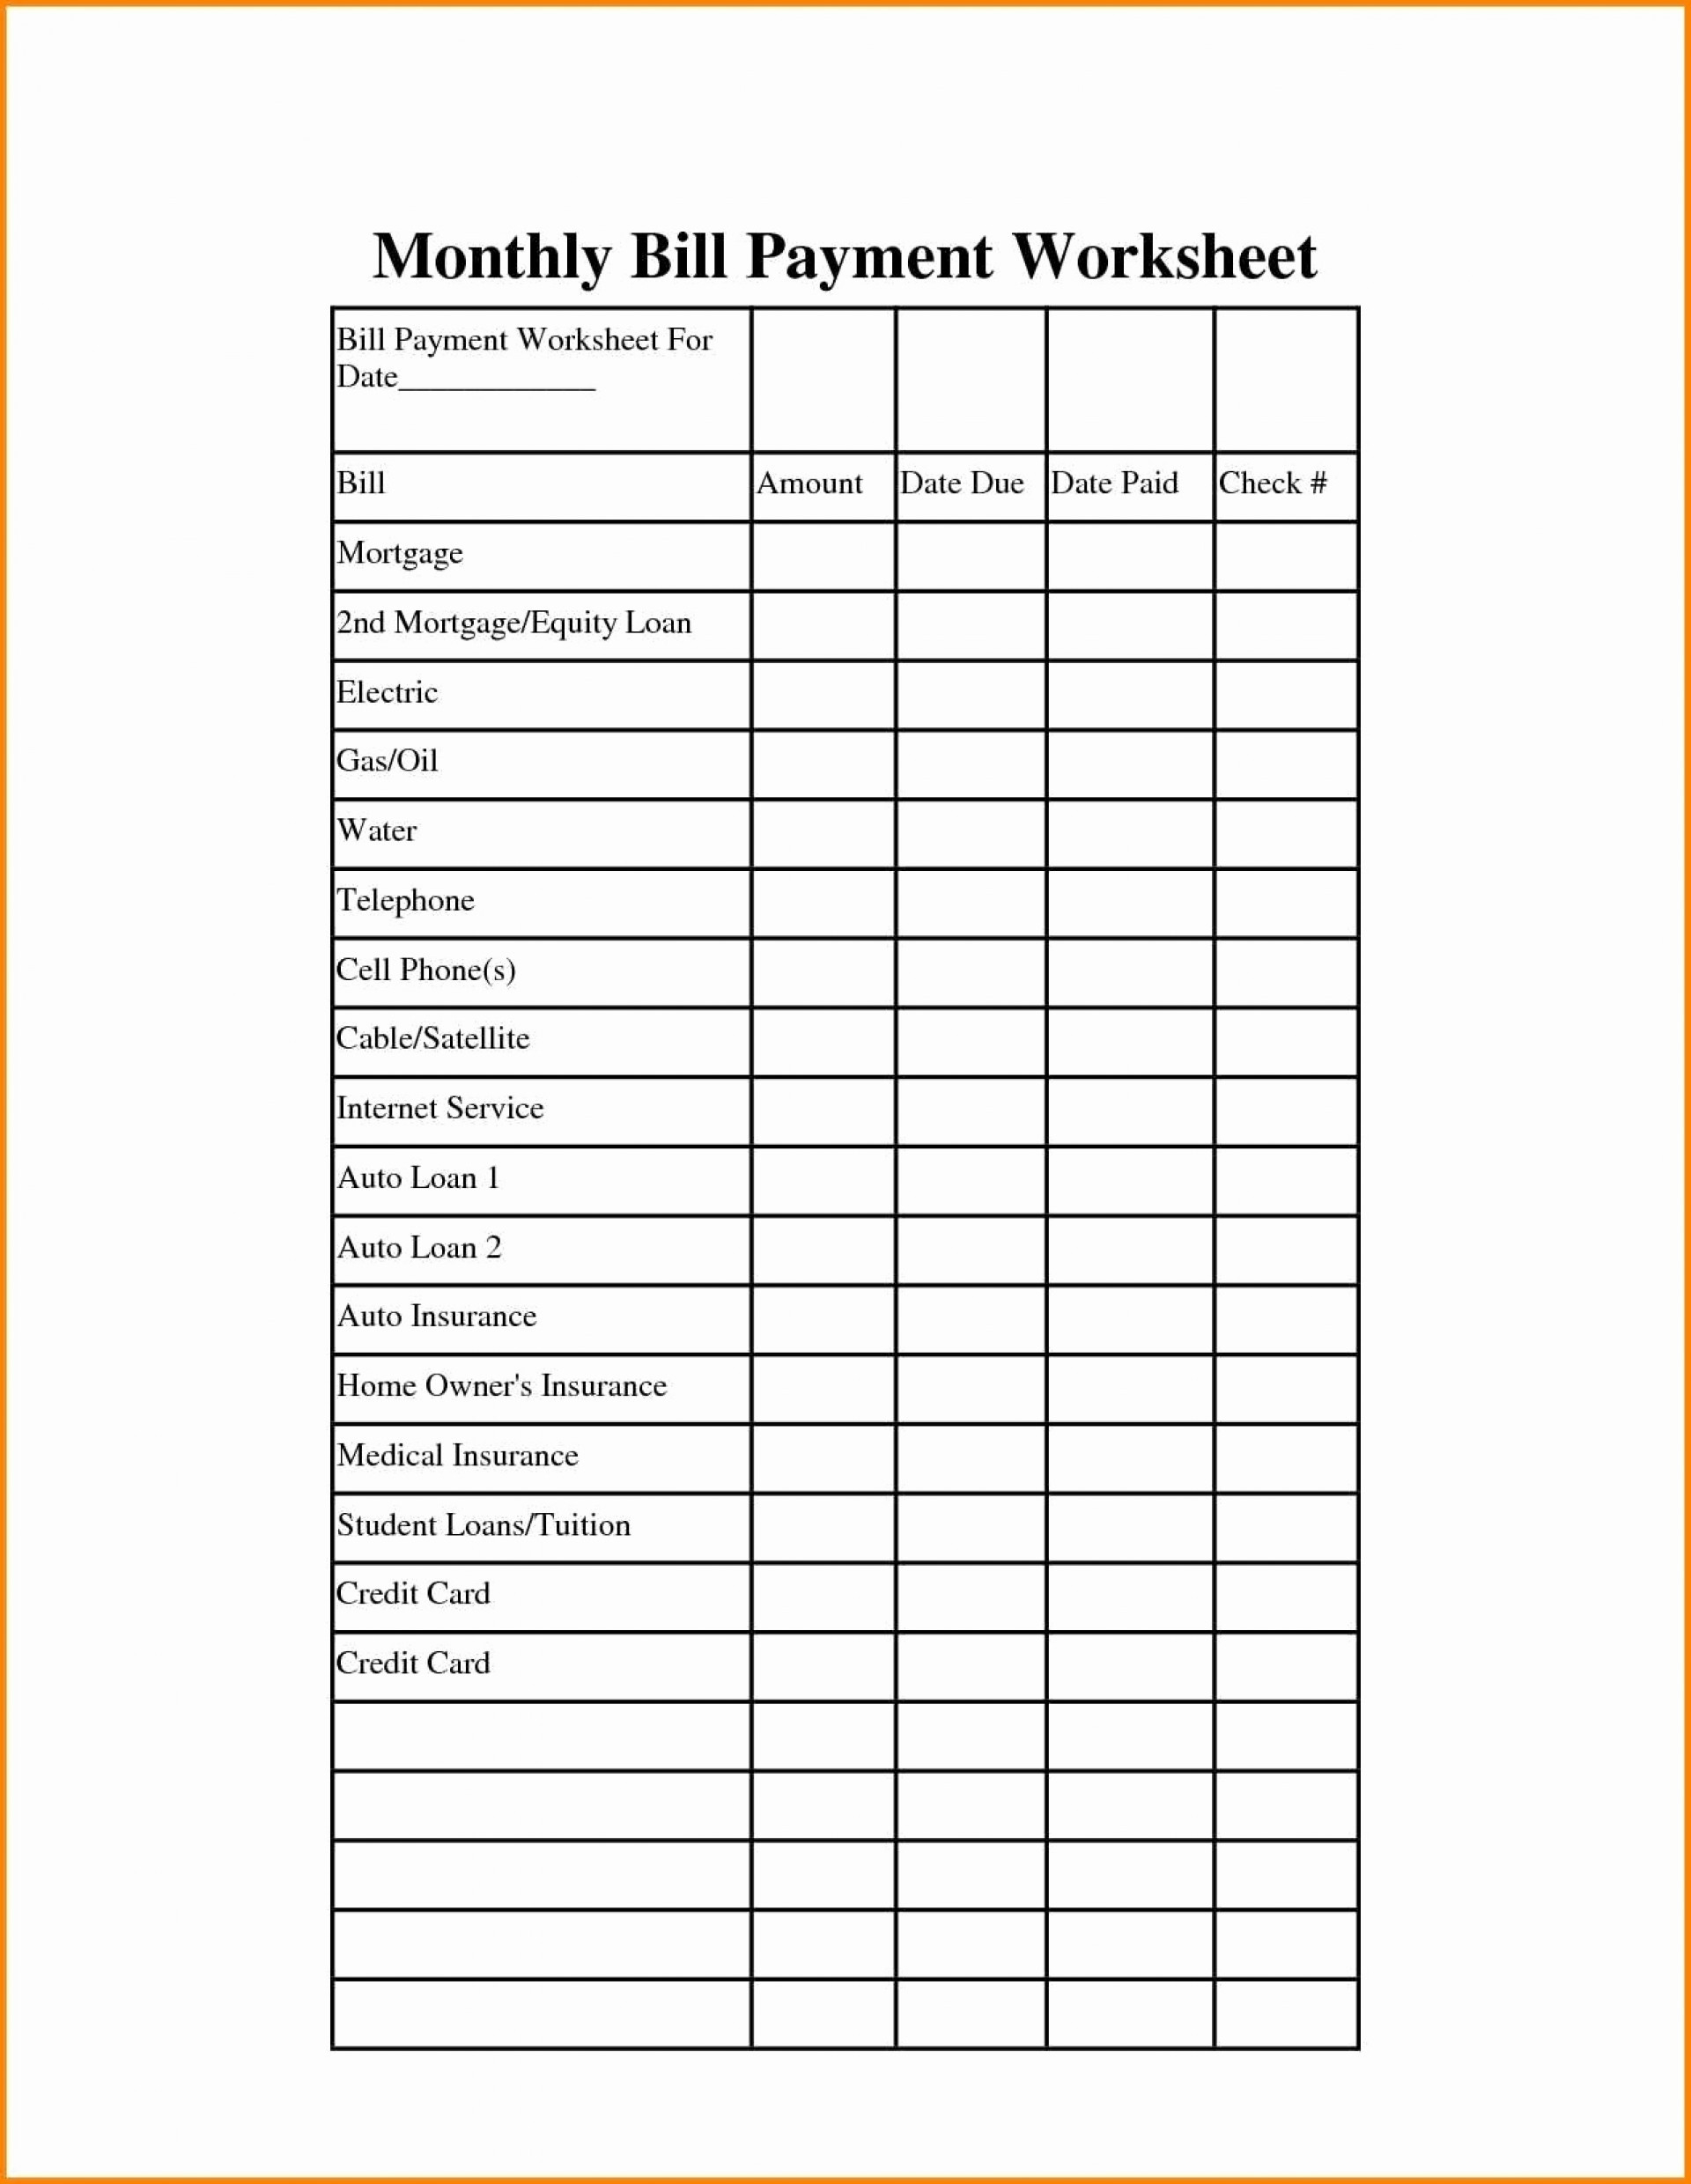 Blank Monthly Bill Payment Worksheet | Free Calendar  Bill Payment Worksheet